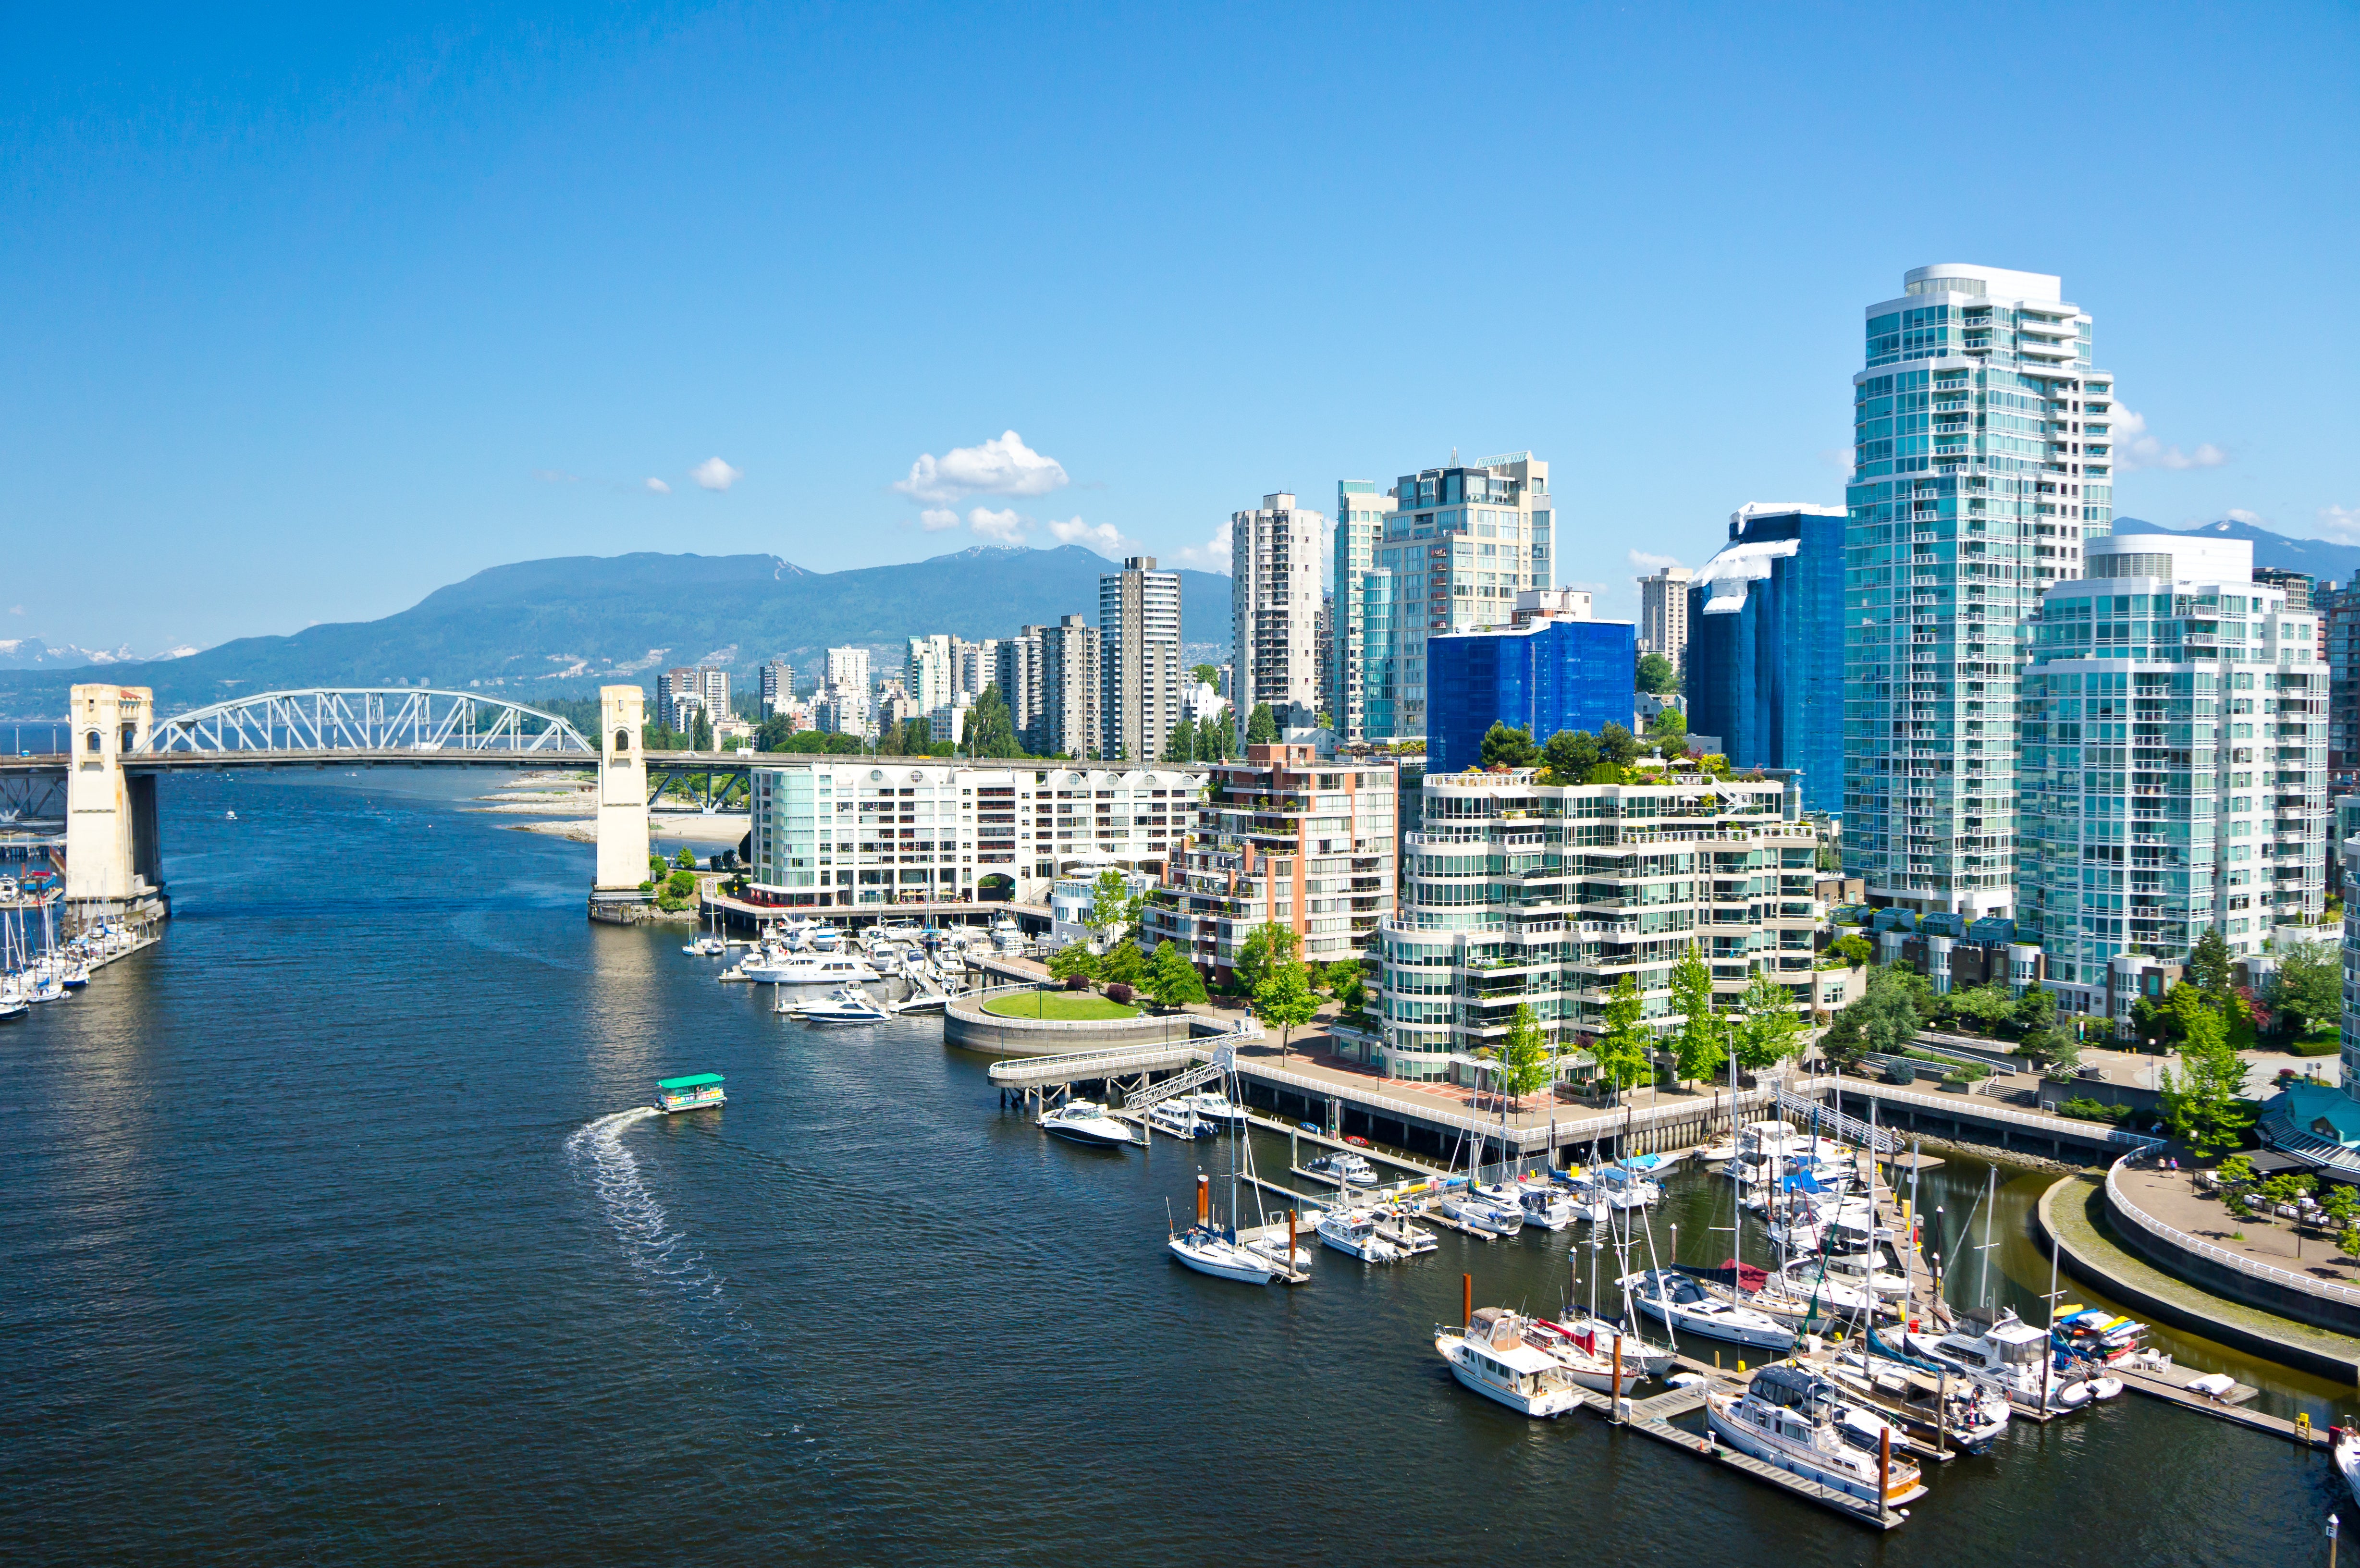 Vancouver makes for a best-of-all-worlds trip